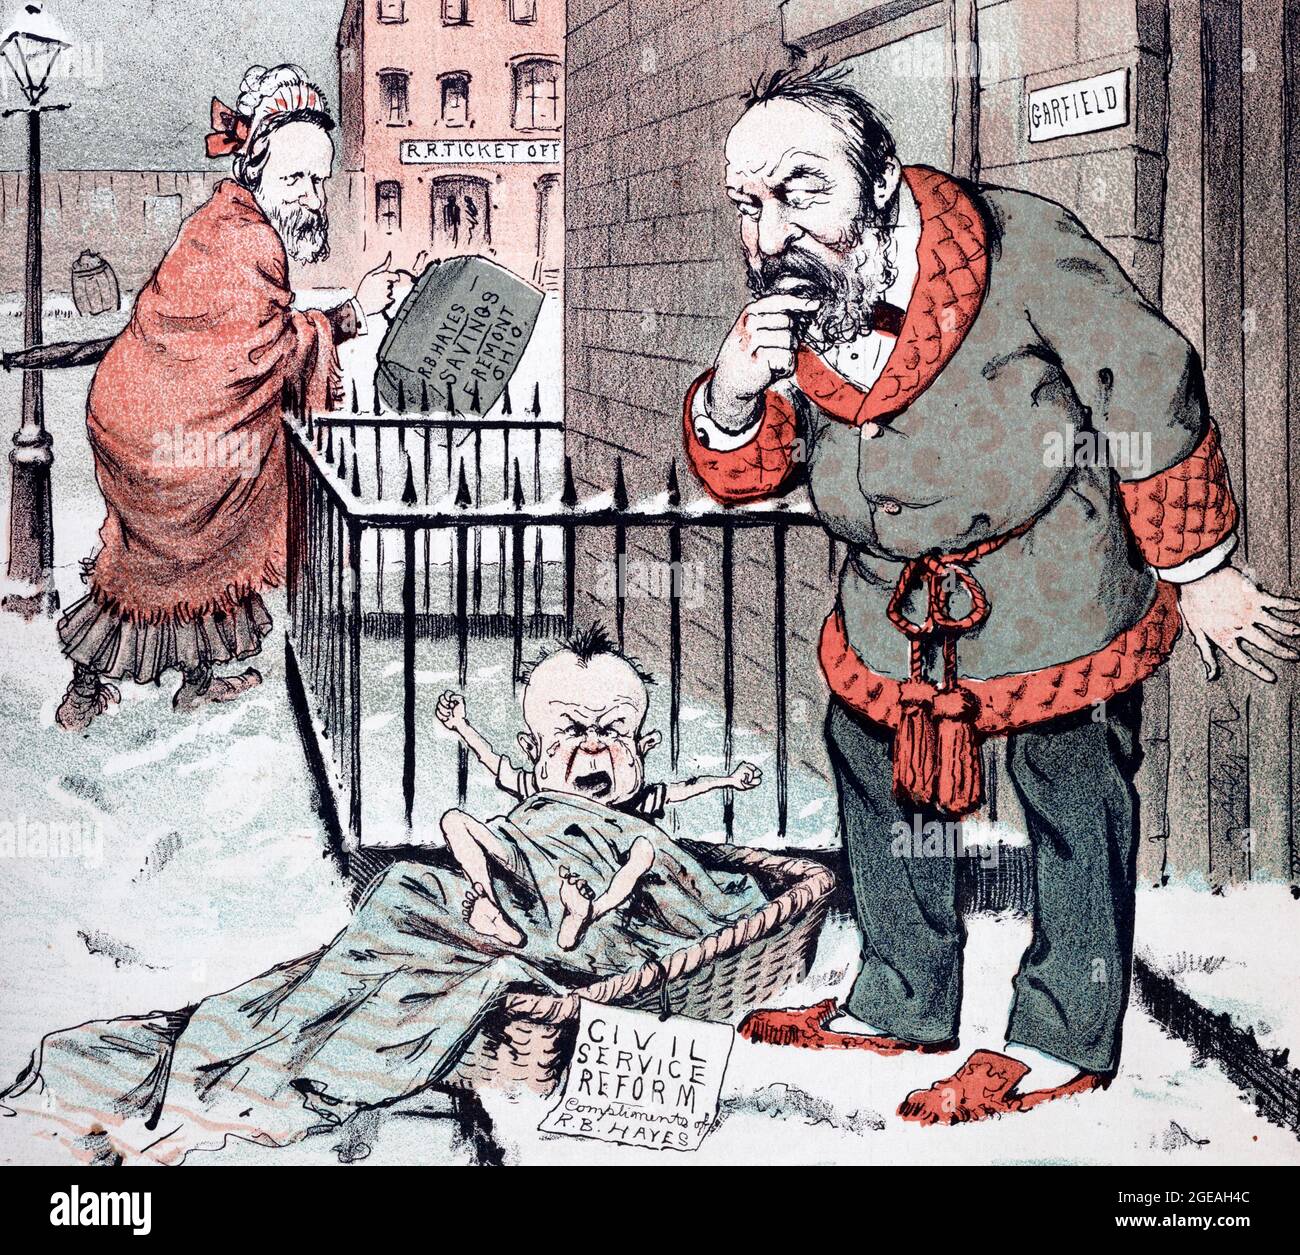 Left - Illustration shows President-elect James A. Garfield standing on the steps to his home, in the snow, looking at a screaming baby in a basket labeled 'Civil Service Reform, Compliments of R.B. Hayes. Rutherford B. Hayes, dressed as a woman, is seen leaving with a bag labeled R.B. Hayes - Savings, Fremont, Ohio Stock Photo